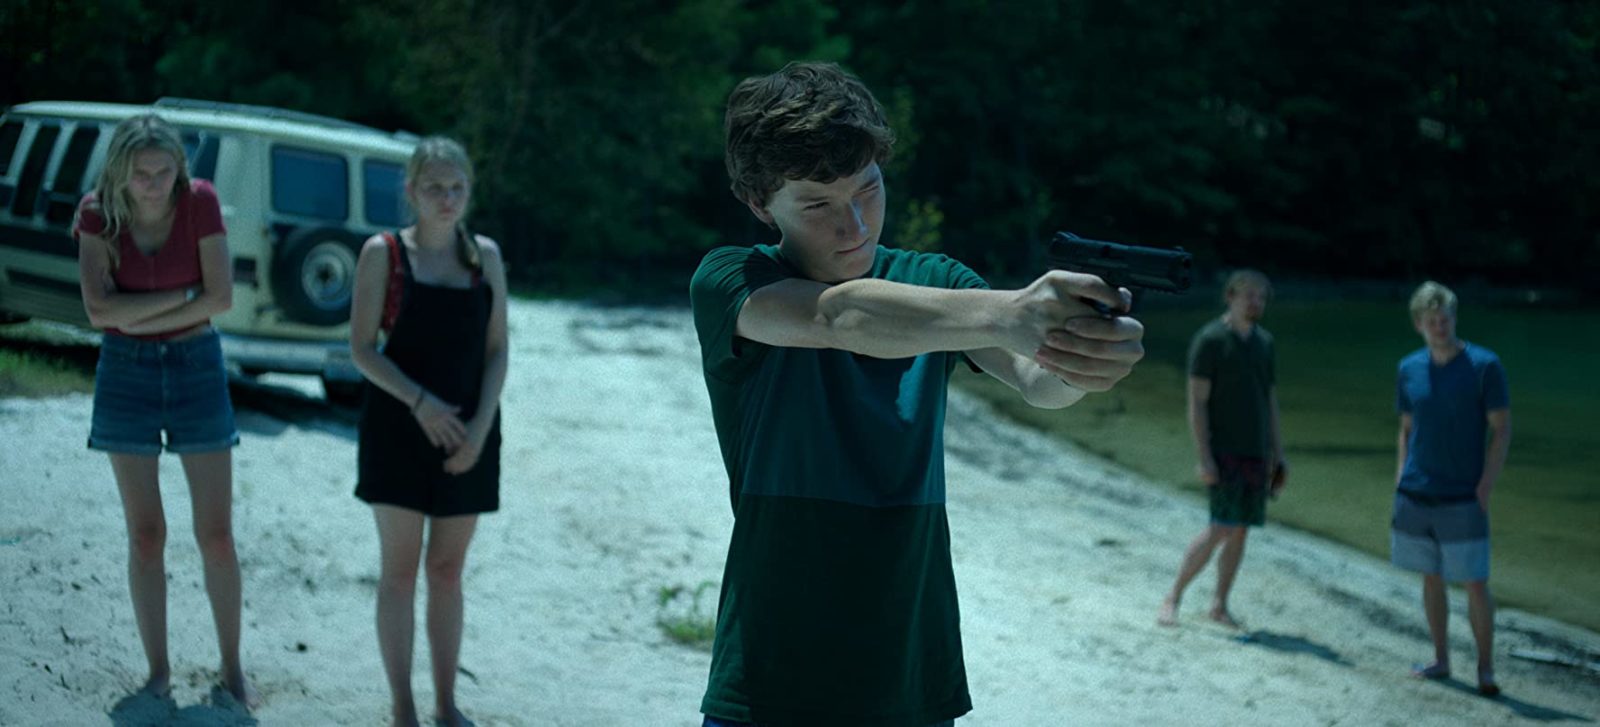 Ozark Season 4: Release Date, Cast, Plot And All About The Show